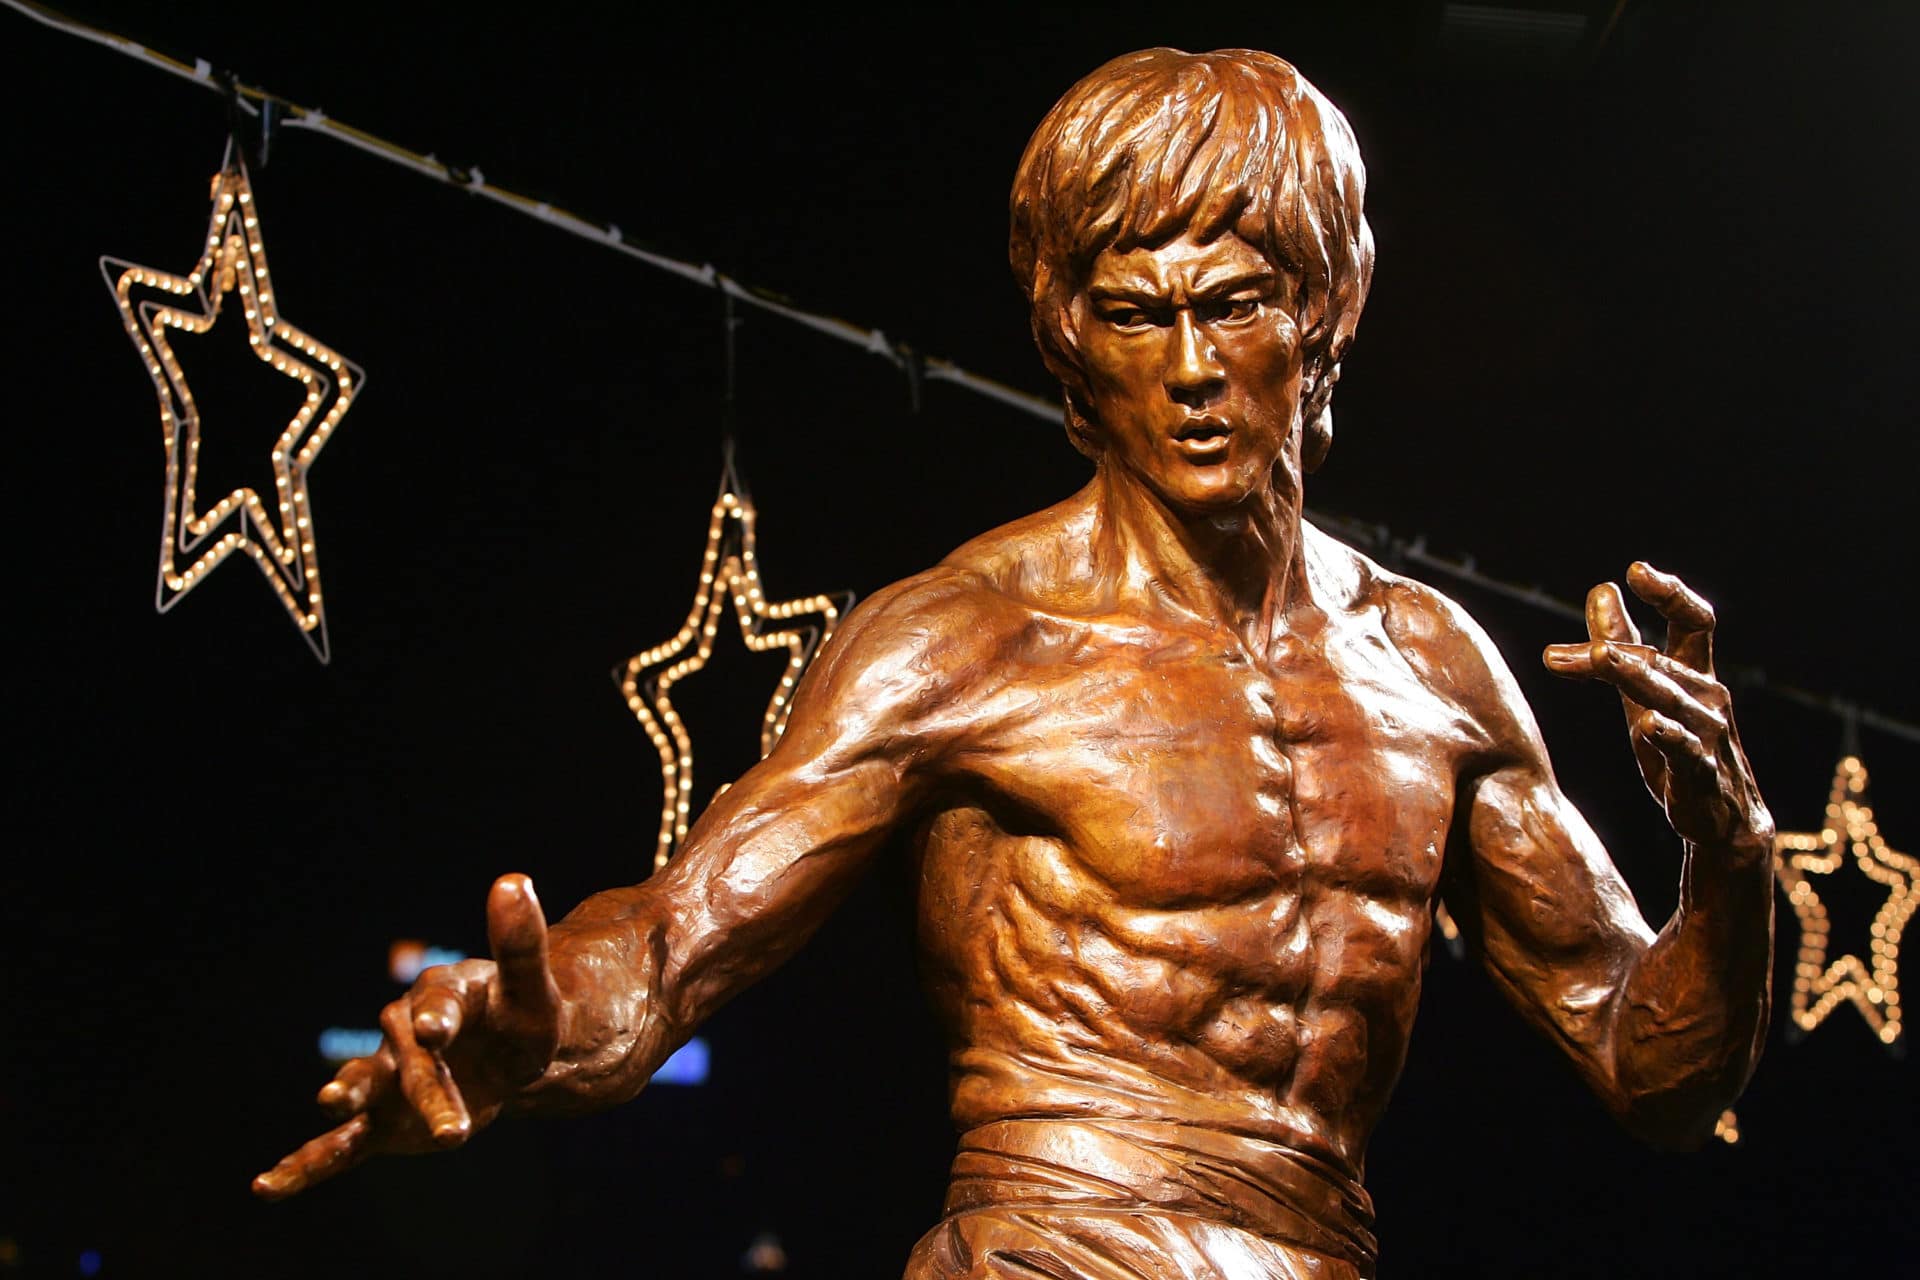 On Bruce Lee's death anniversary, a celebration of life ...